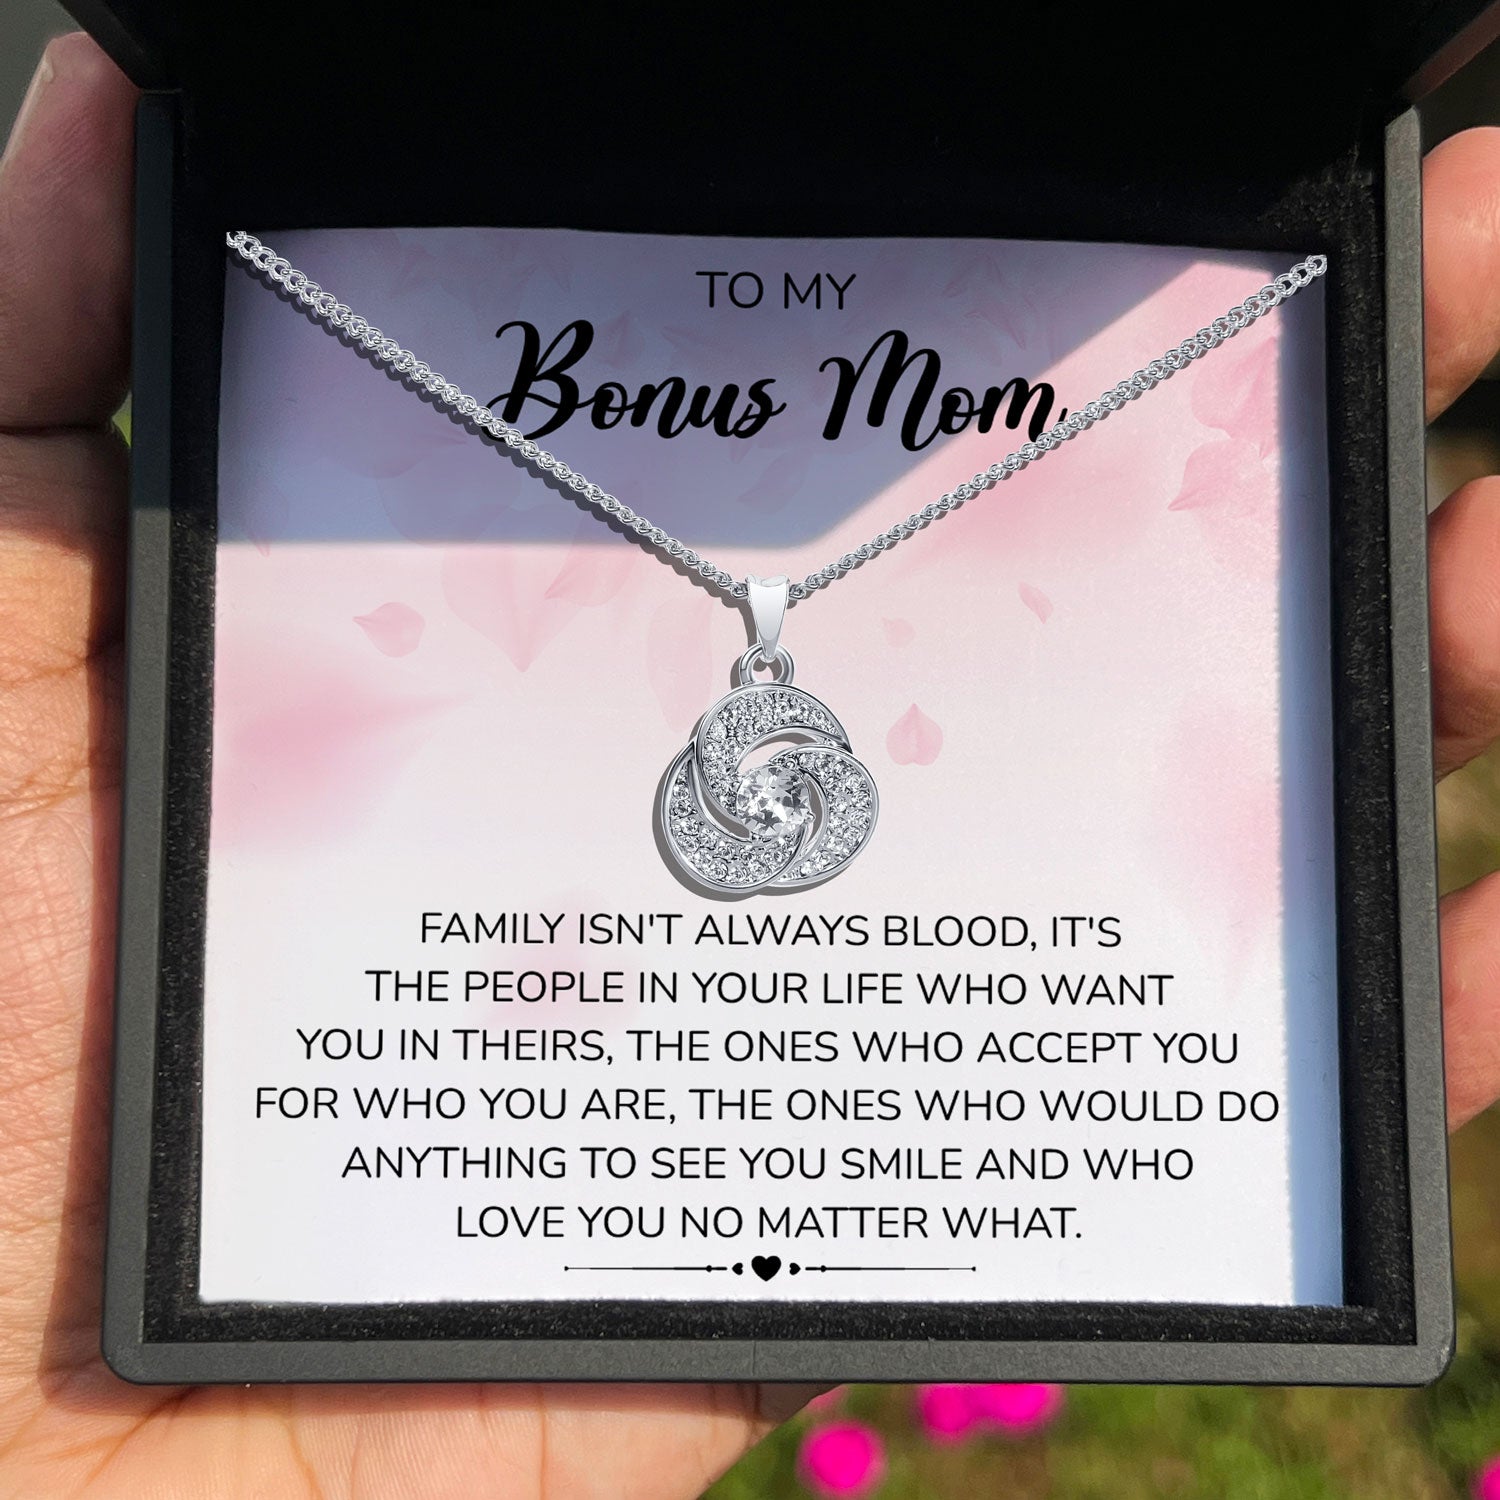 To My Bonus Mom - Love You No Matter What - Tryndi Love Knot Necklace